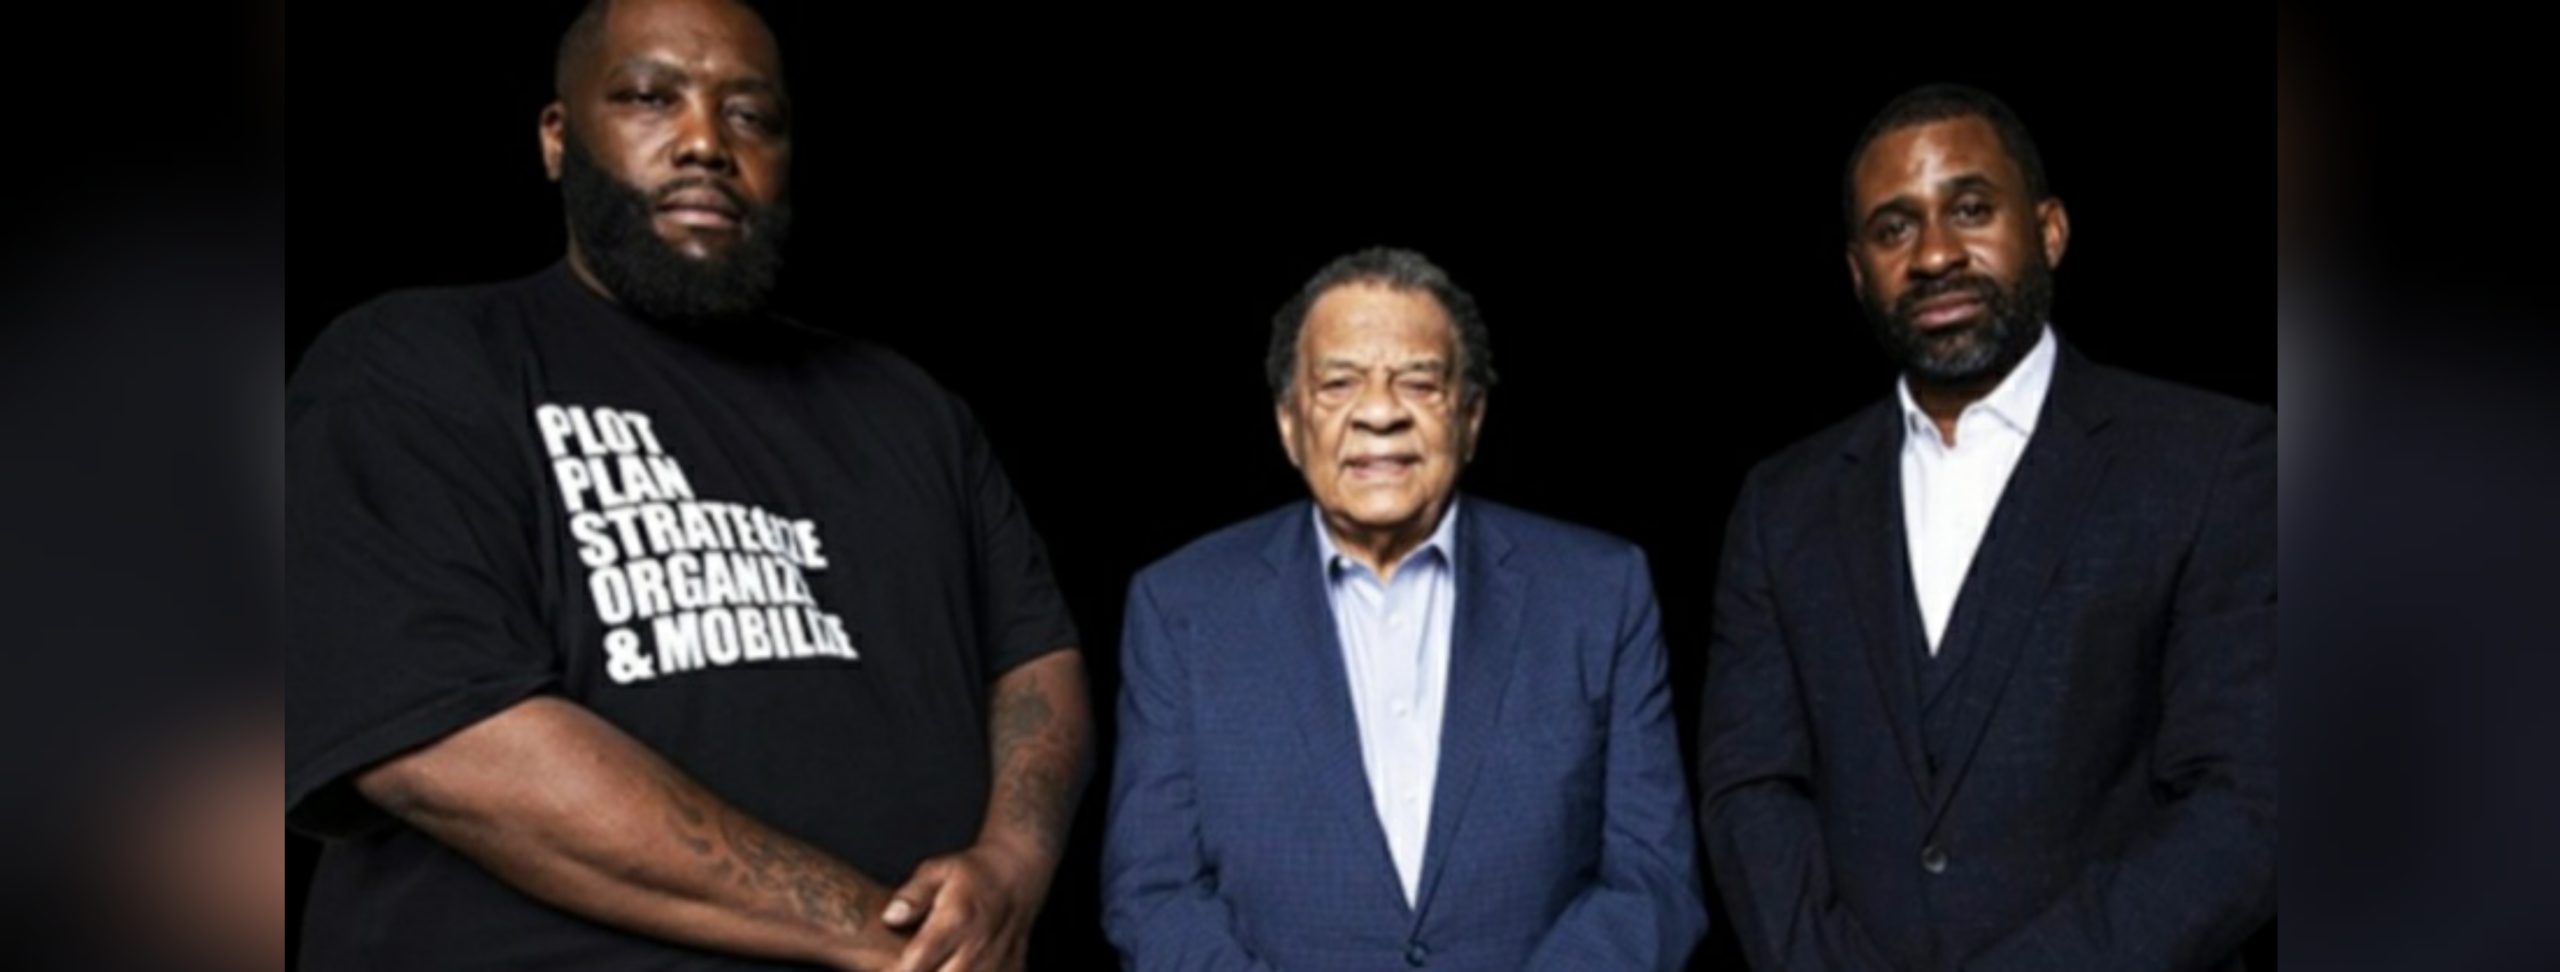 Digital bank launched by Killer Mike, Andrew Young, And Ryan Glover